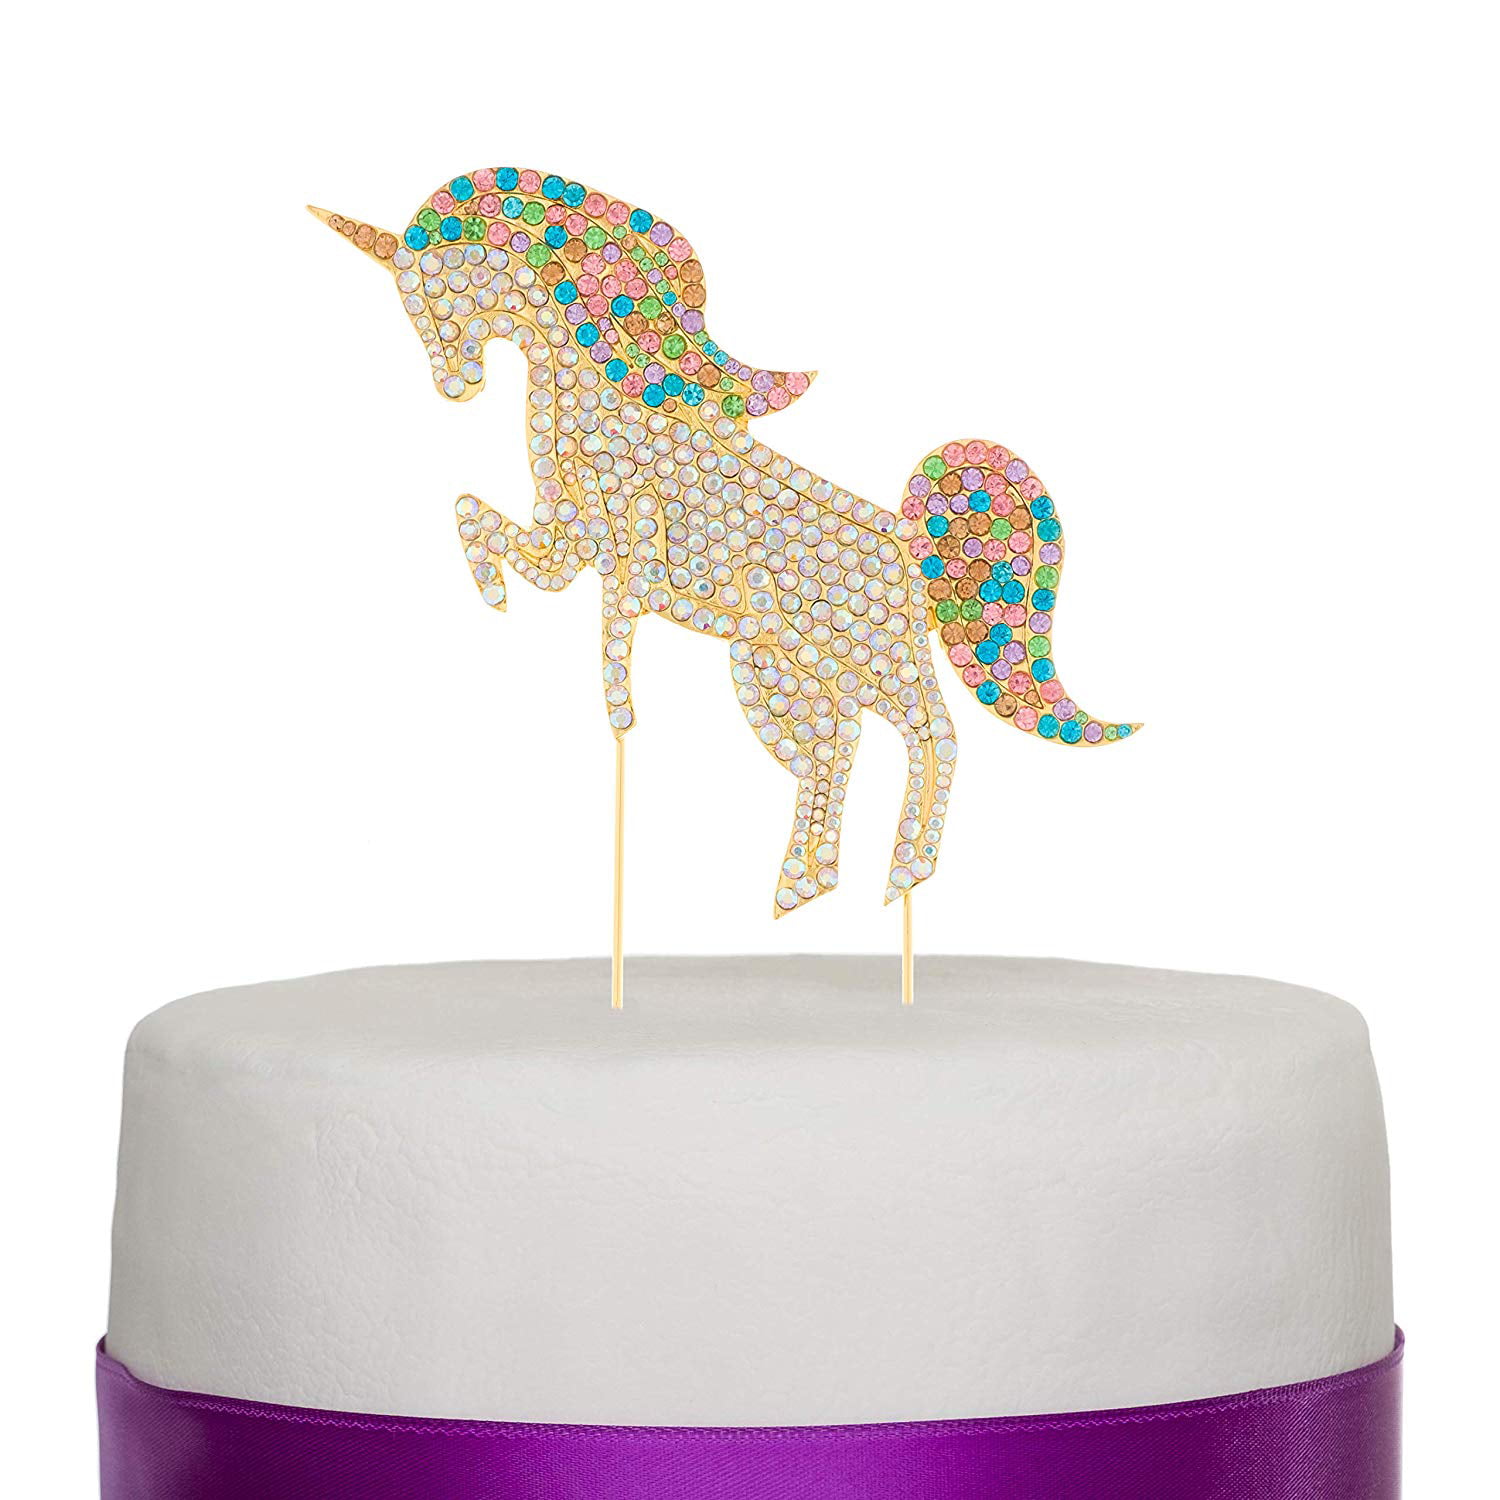 8" UNICORN MAGICAL MYSTICAL HORSE  SQUARE EDIBLE CAKE TOPPER  & CUPCAKE TOPPERS 